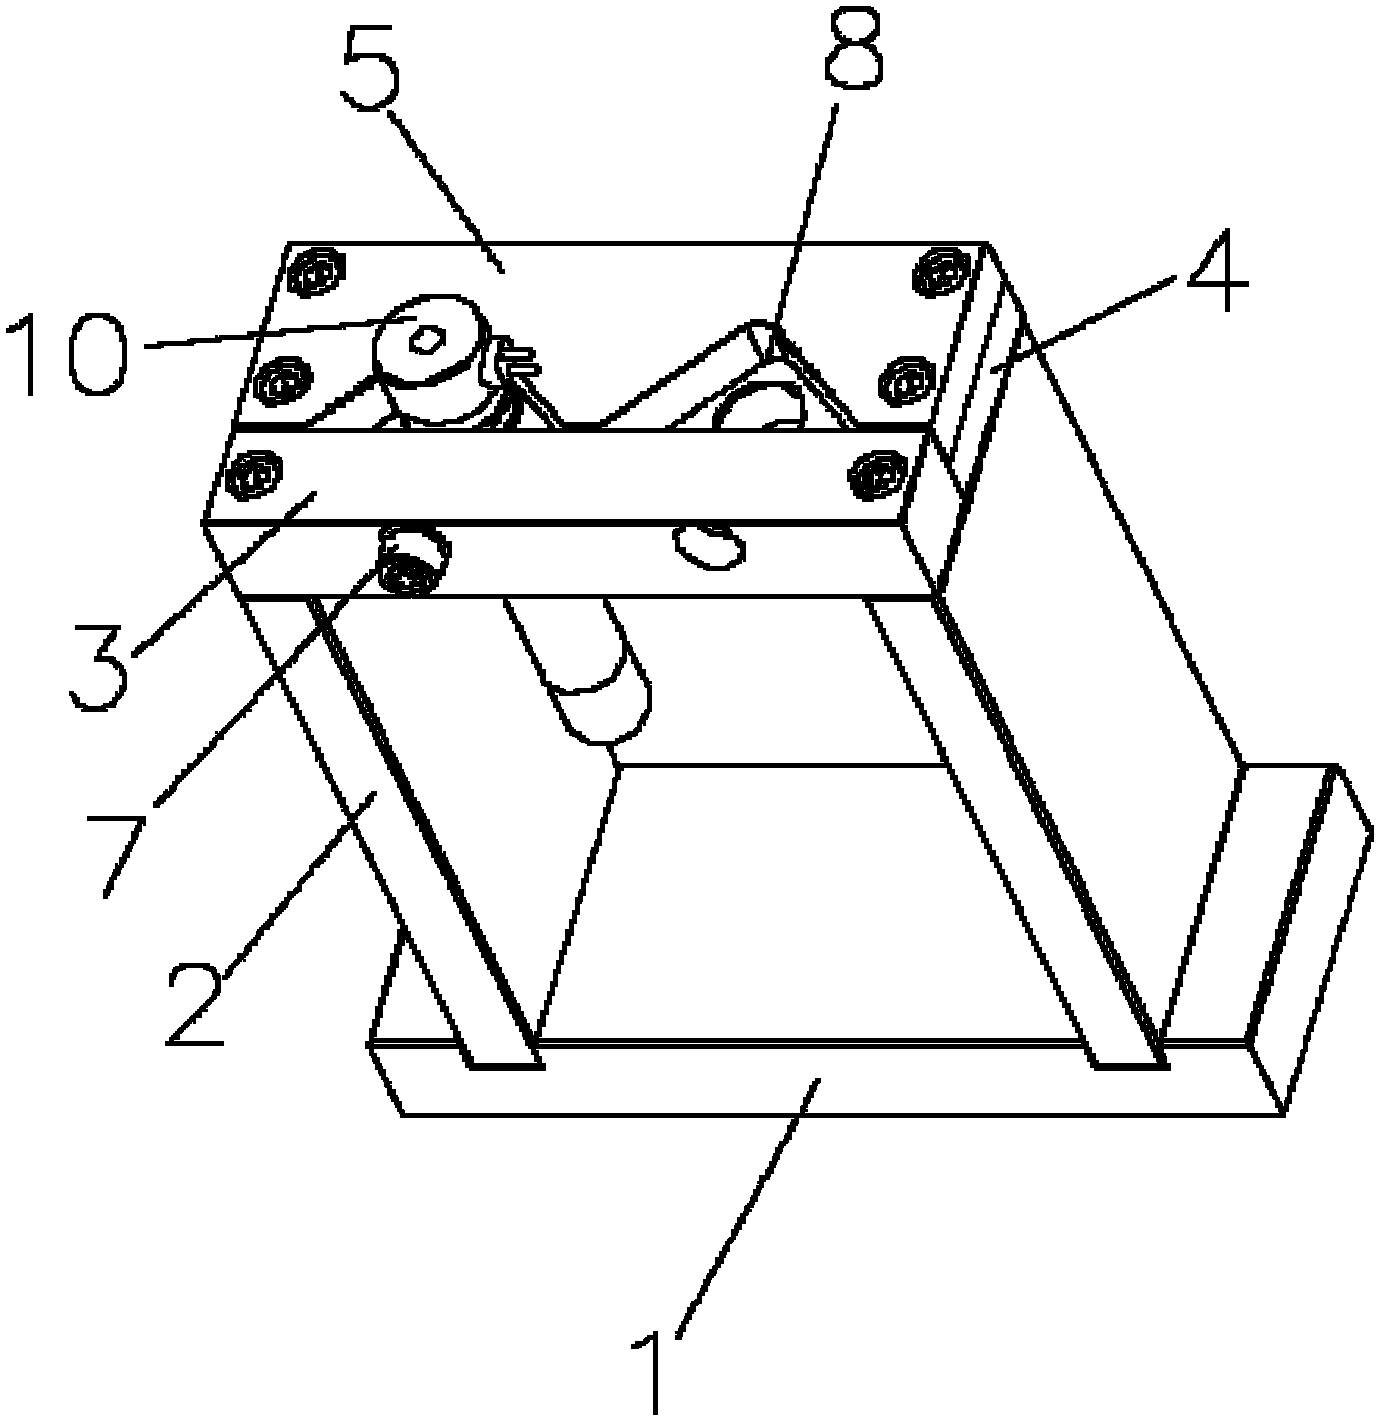 Jig for detecting concentricity of jet nozzle